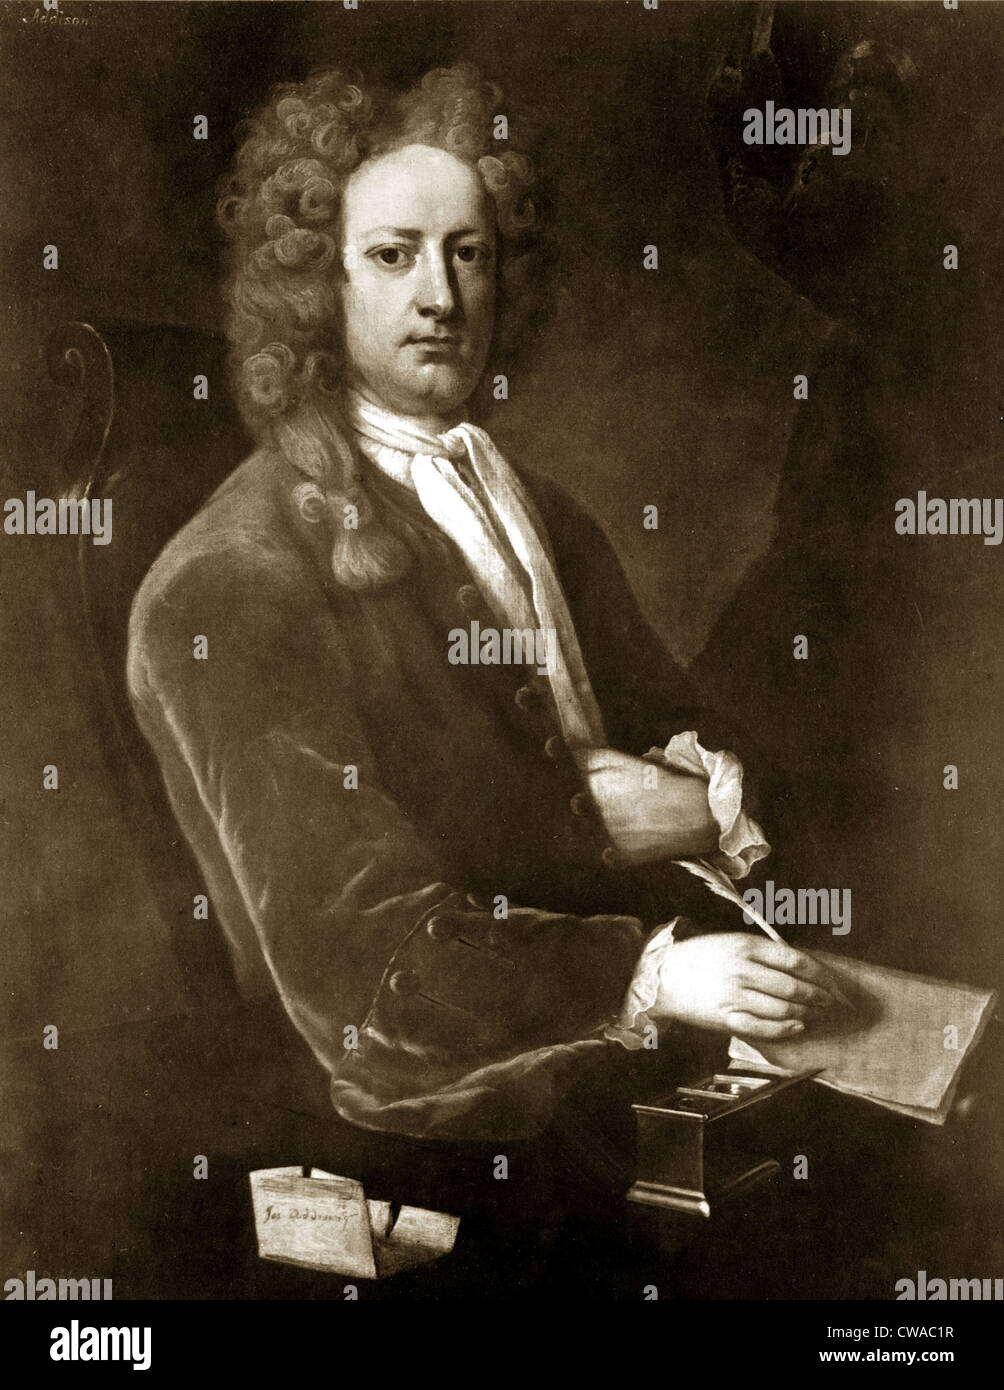 Joseph Addison (1672-1719), intertwined his political and literary careers, accepting commissions to create poetry celebrating Stock Photo